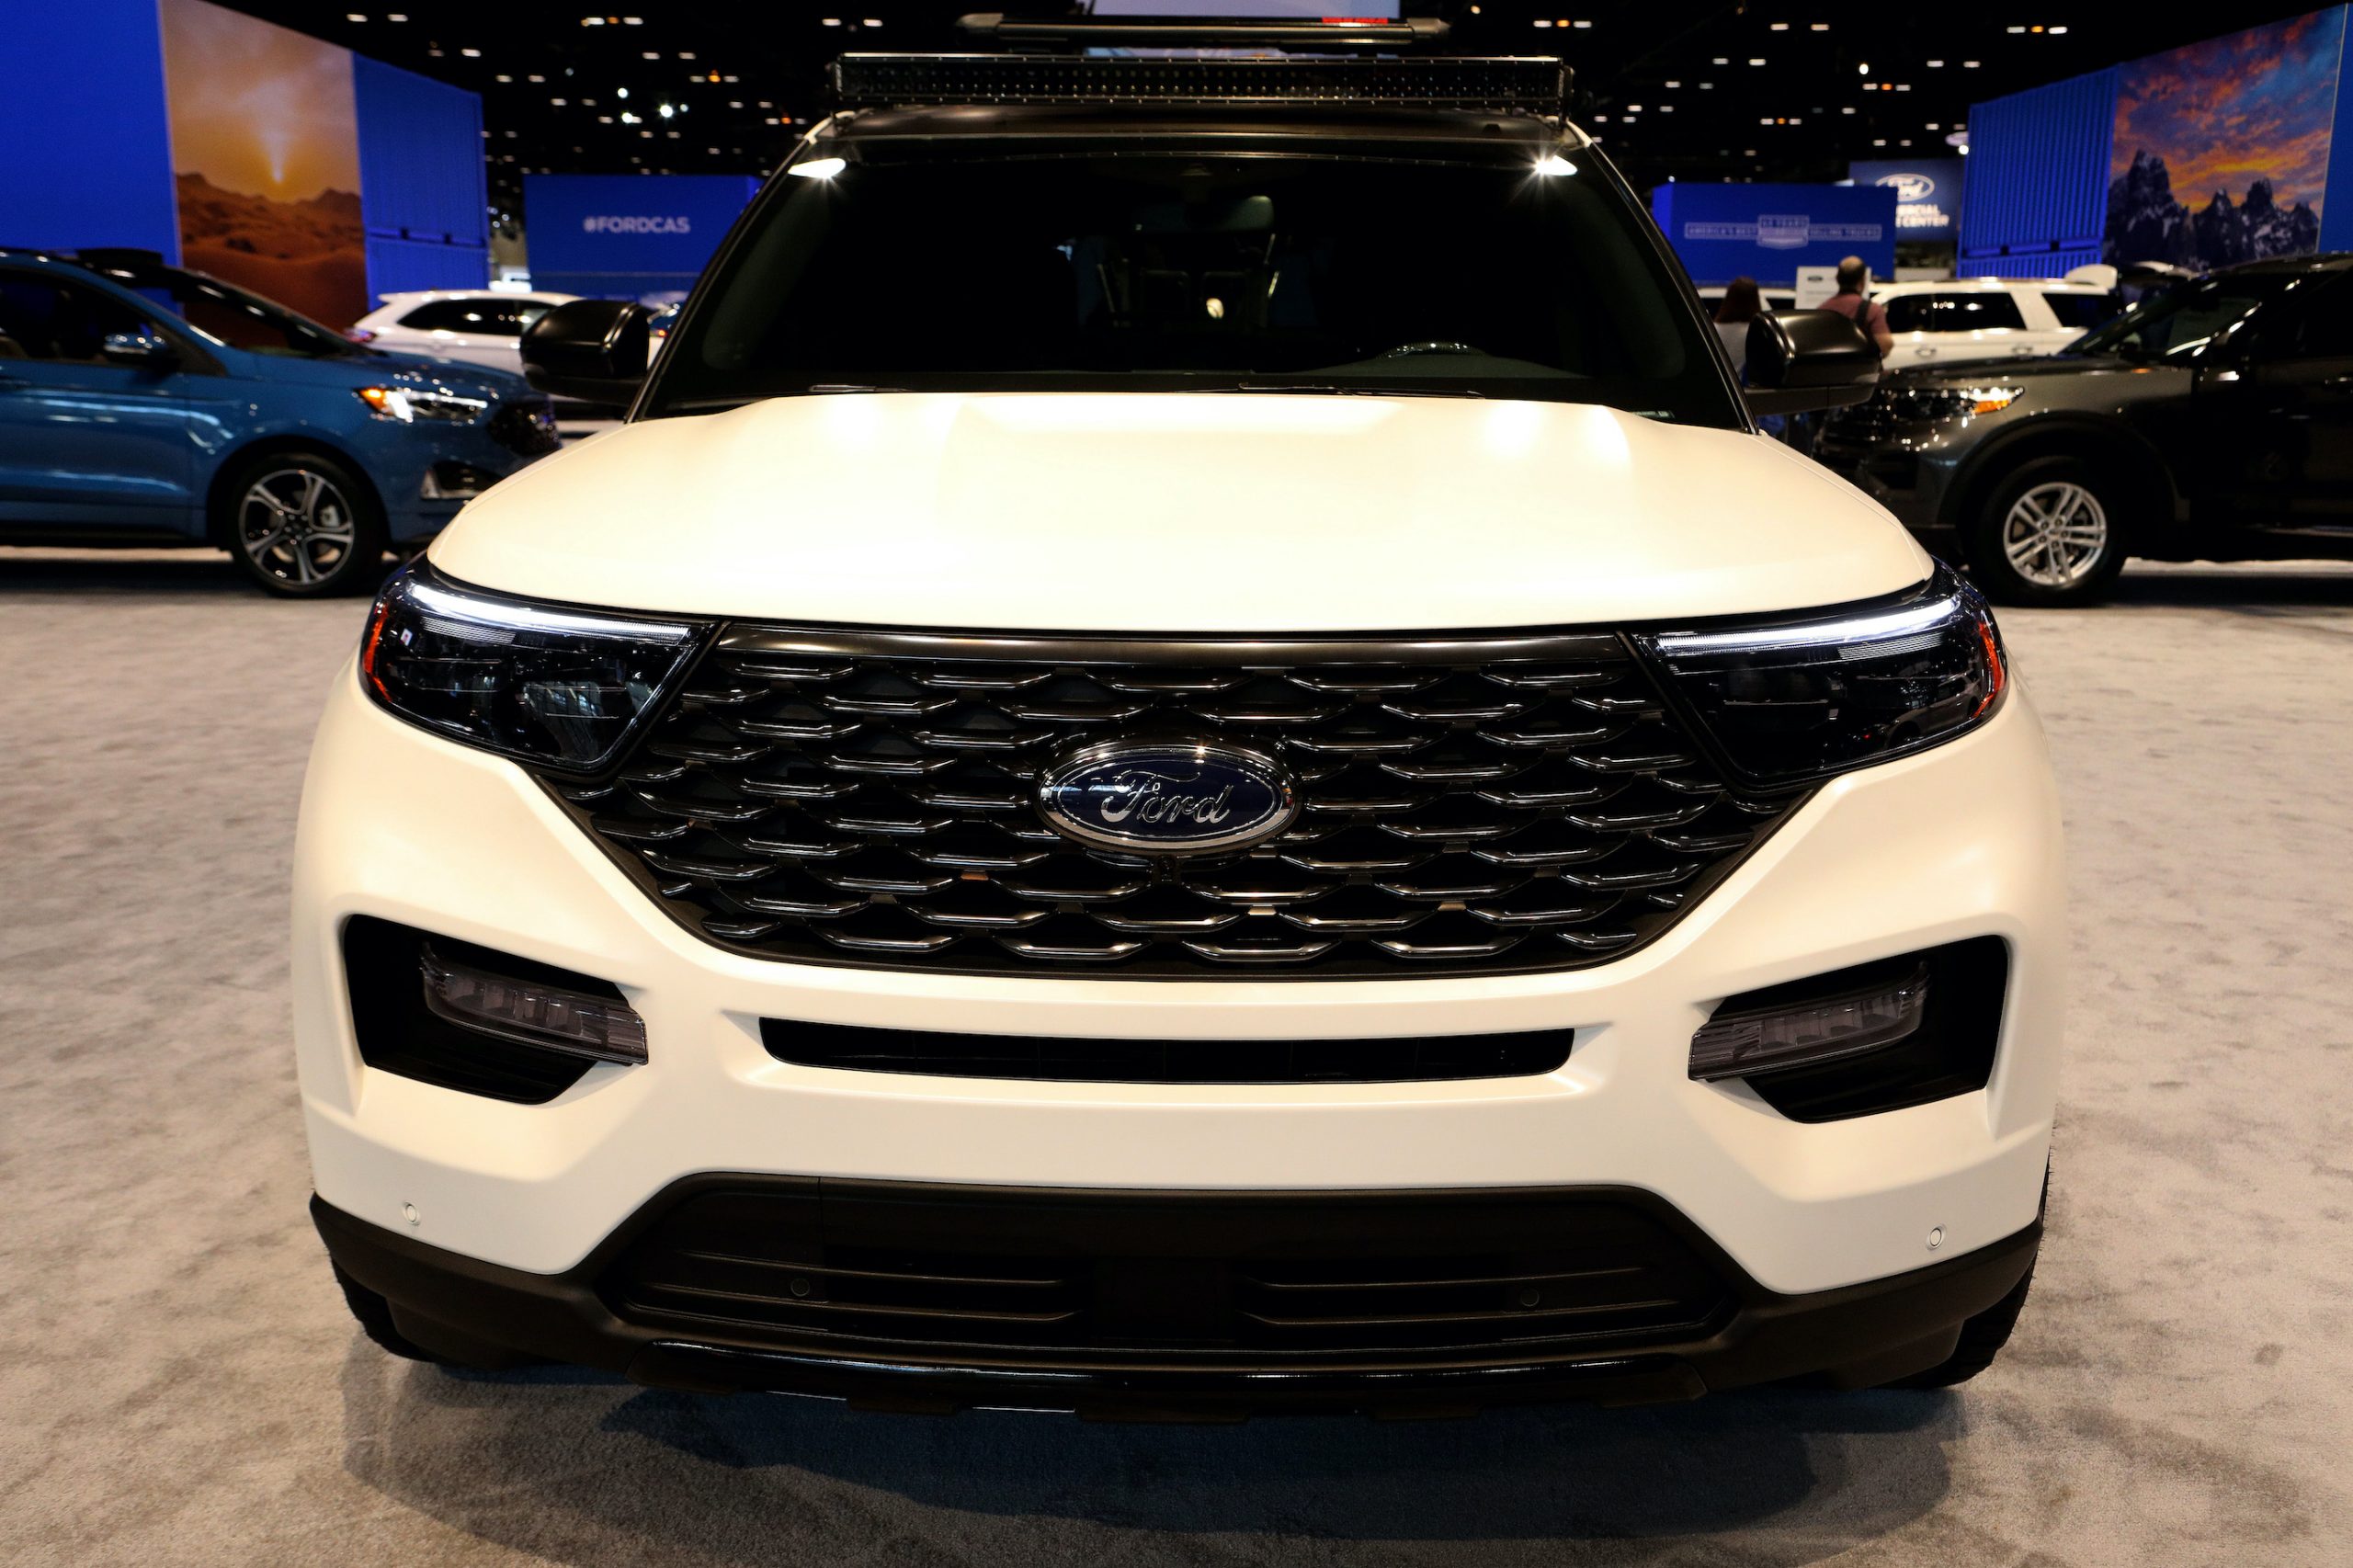 2020 Ford Explorer BTR Edition, competing with the Volkswagen Atlas, is on display at the 112th Annual Chicago Auto Show